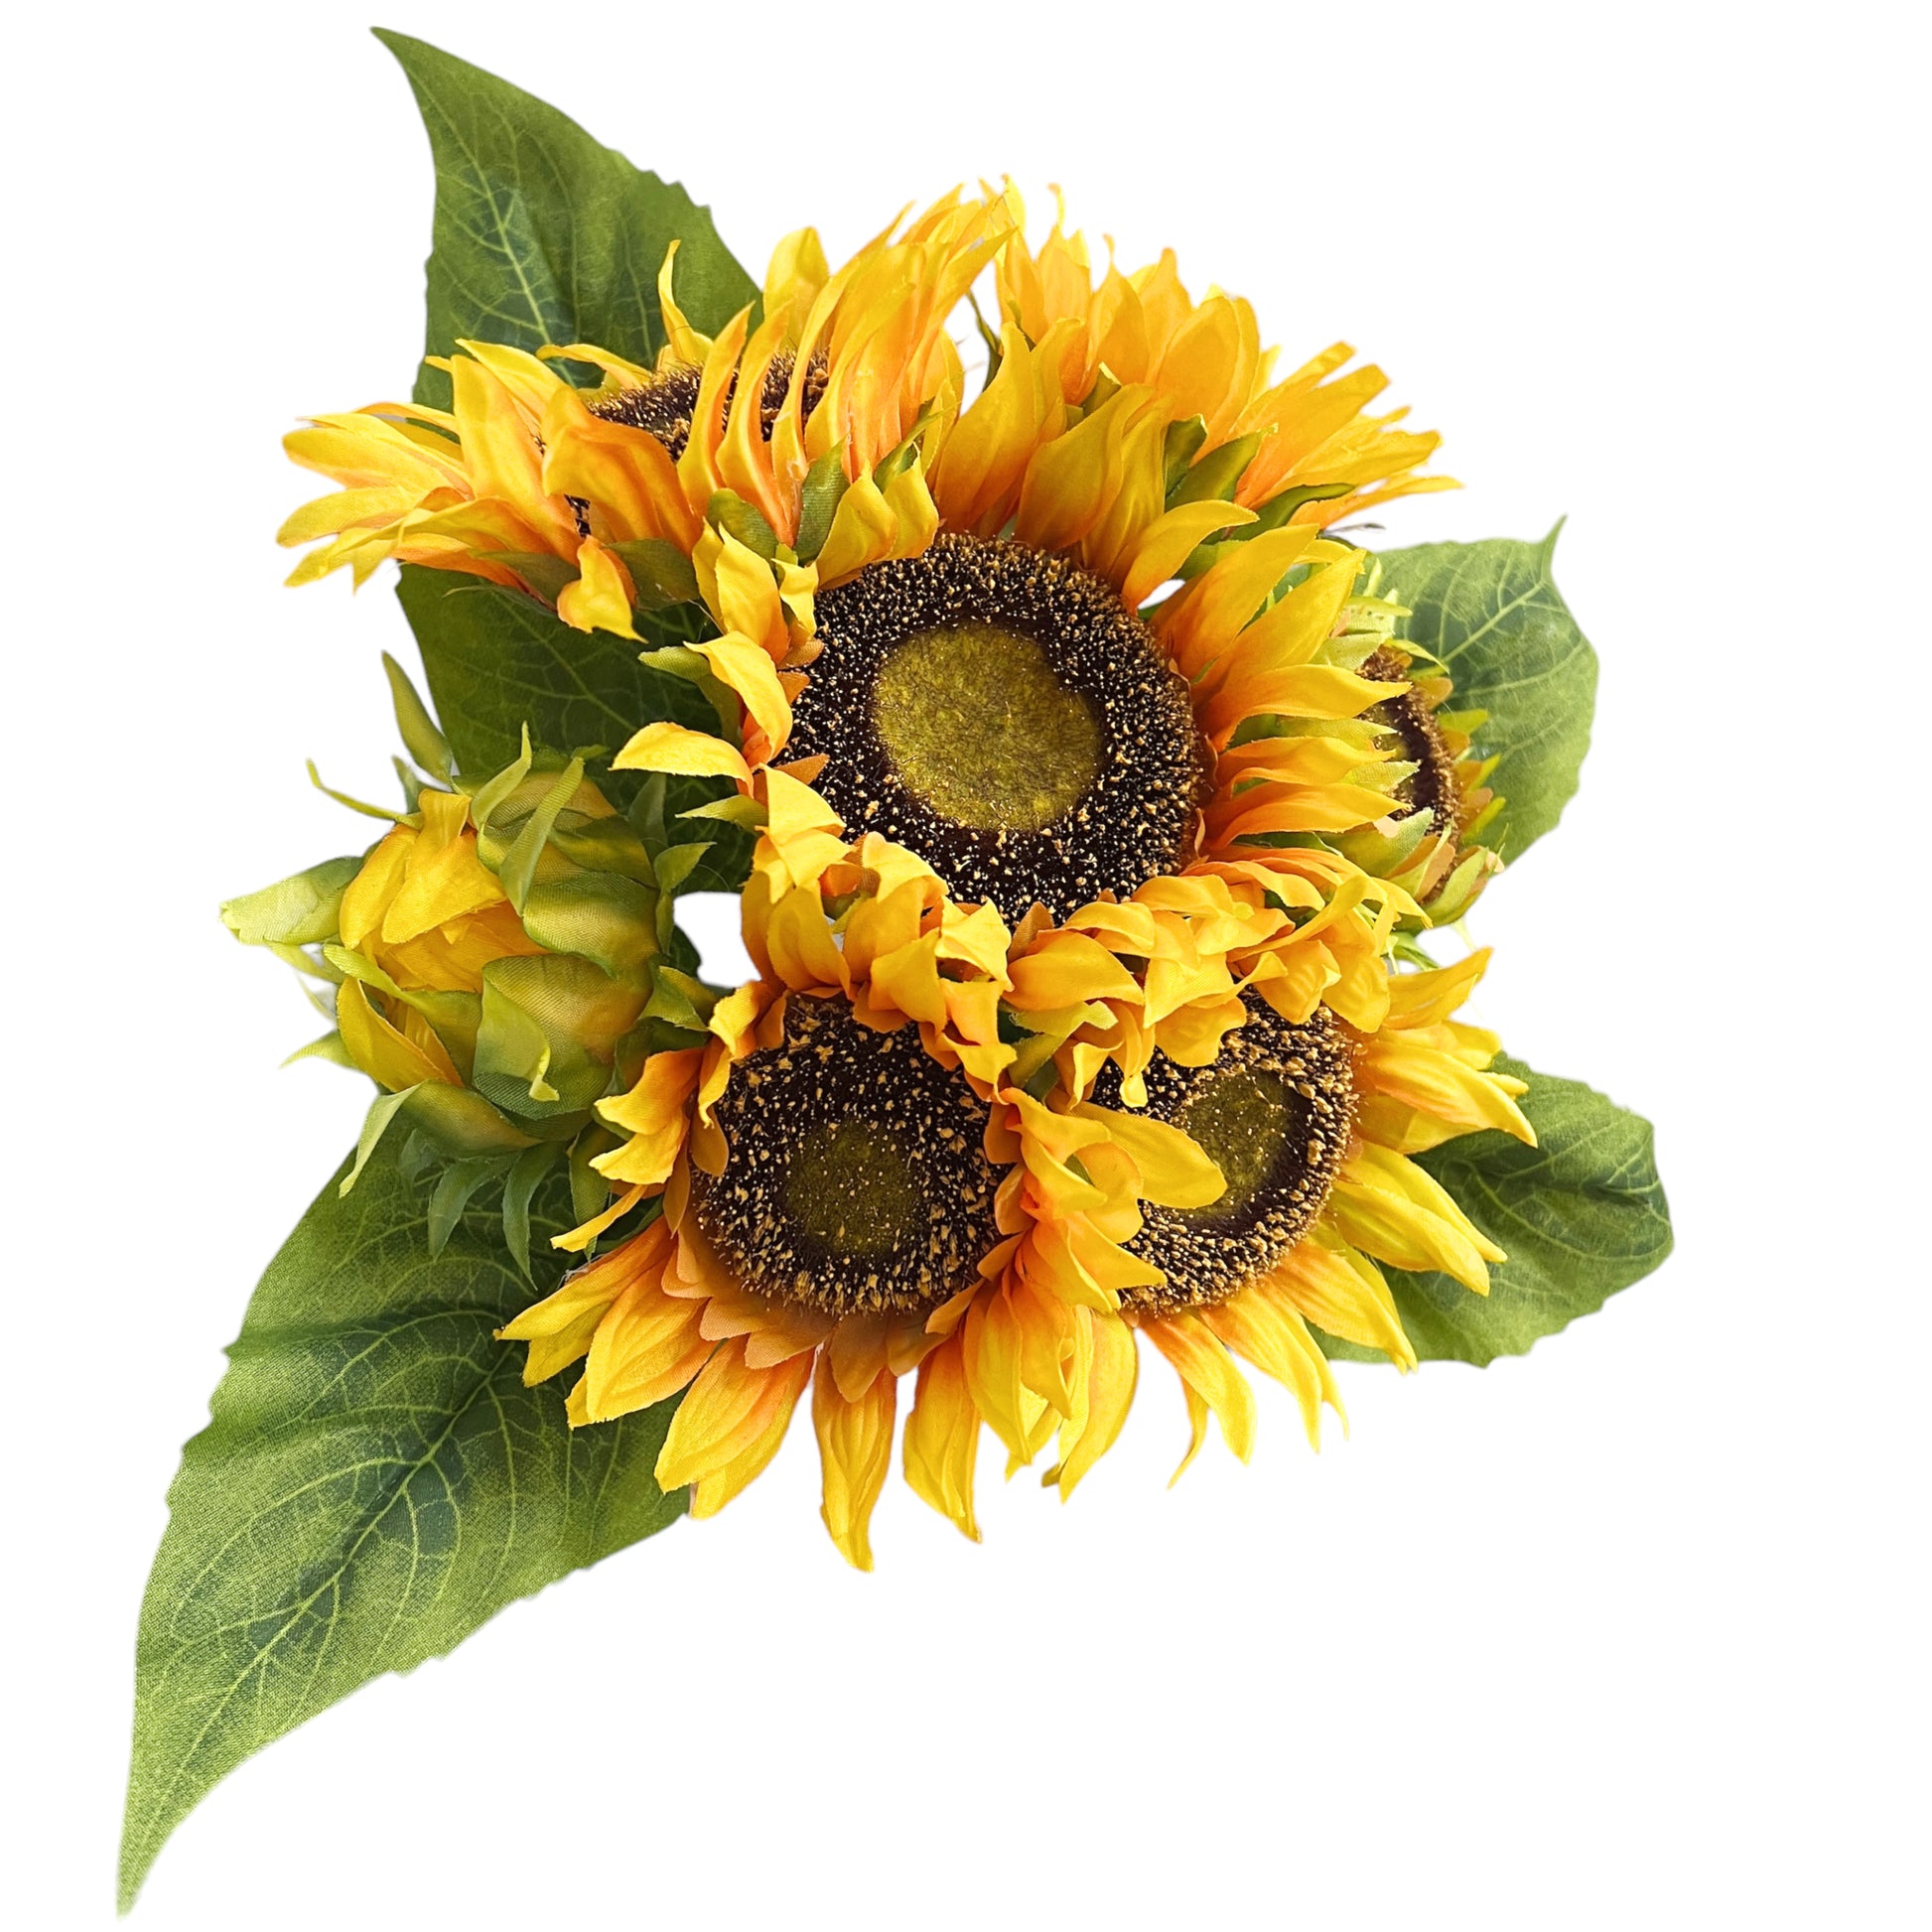 Wholesale Artificial Sunflowers To Decorate Your Environment 